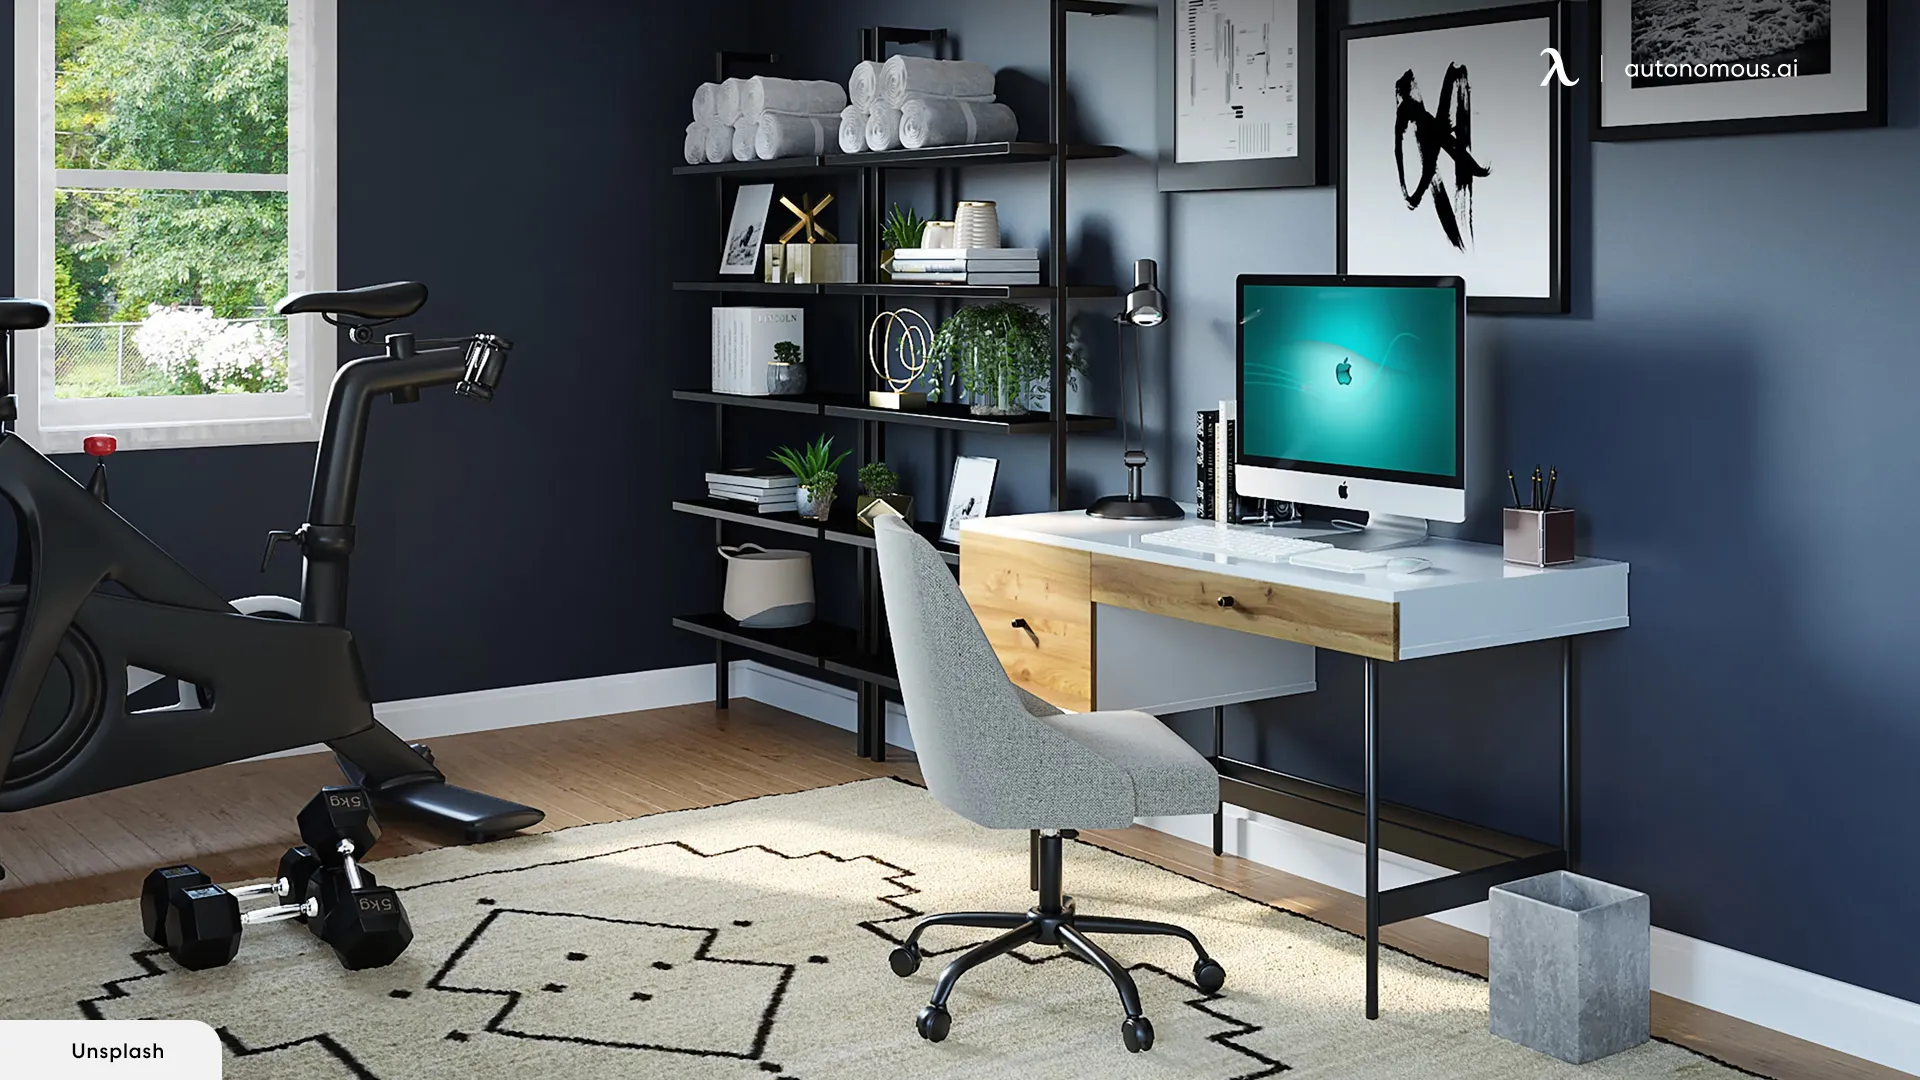 How to Pick a Home Office Paint Color?